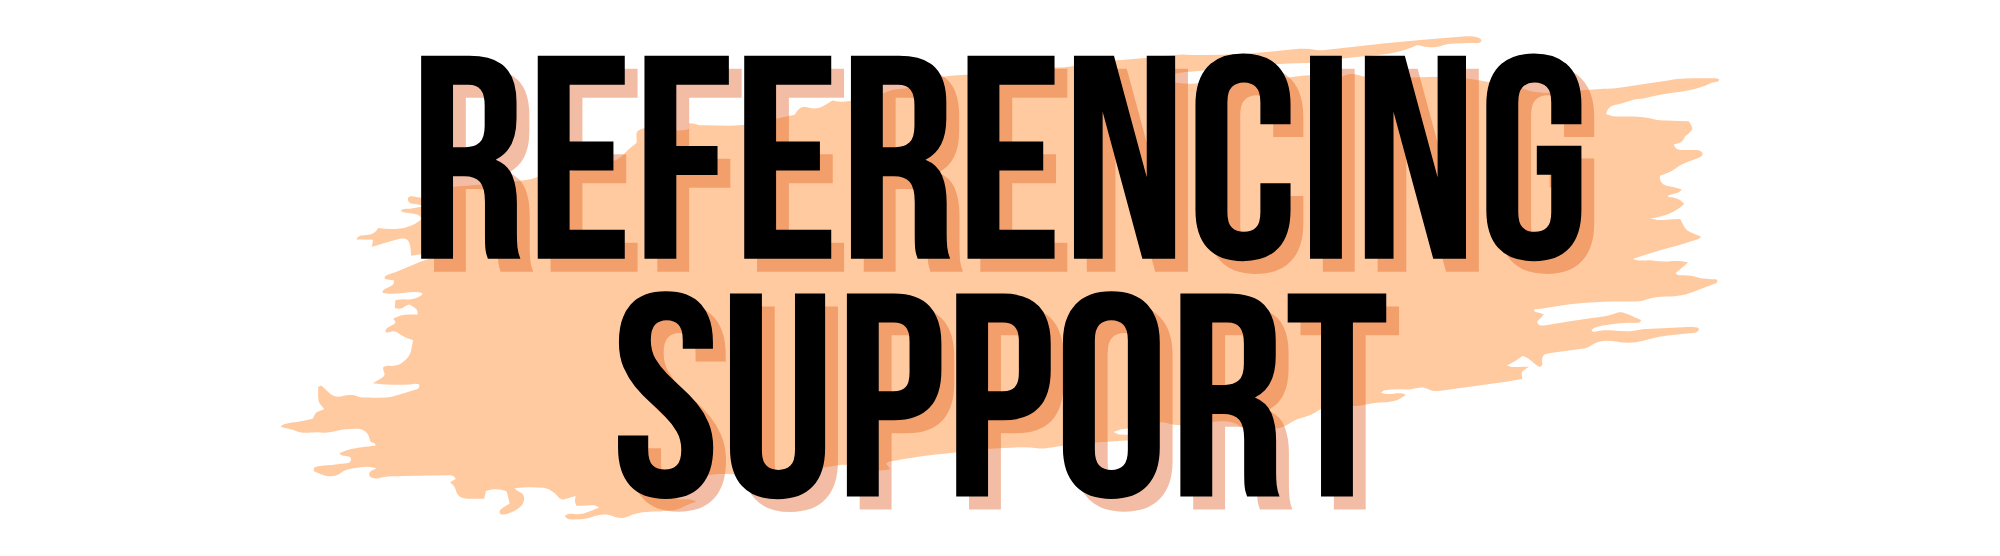 Referencing Support